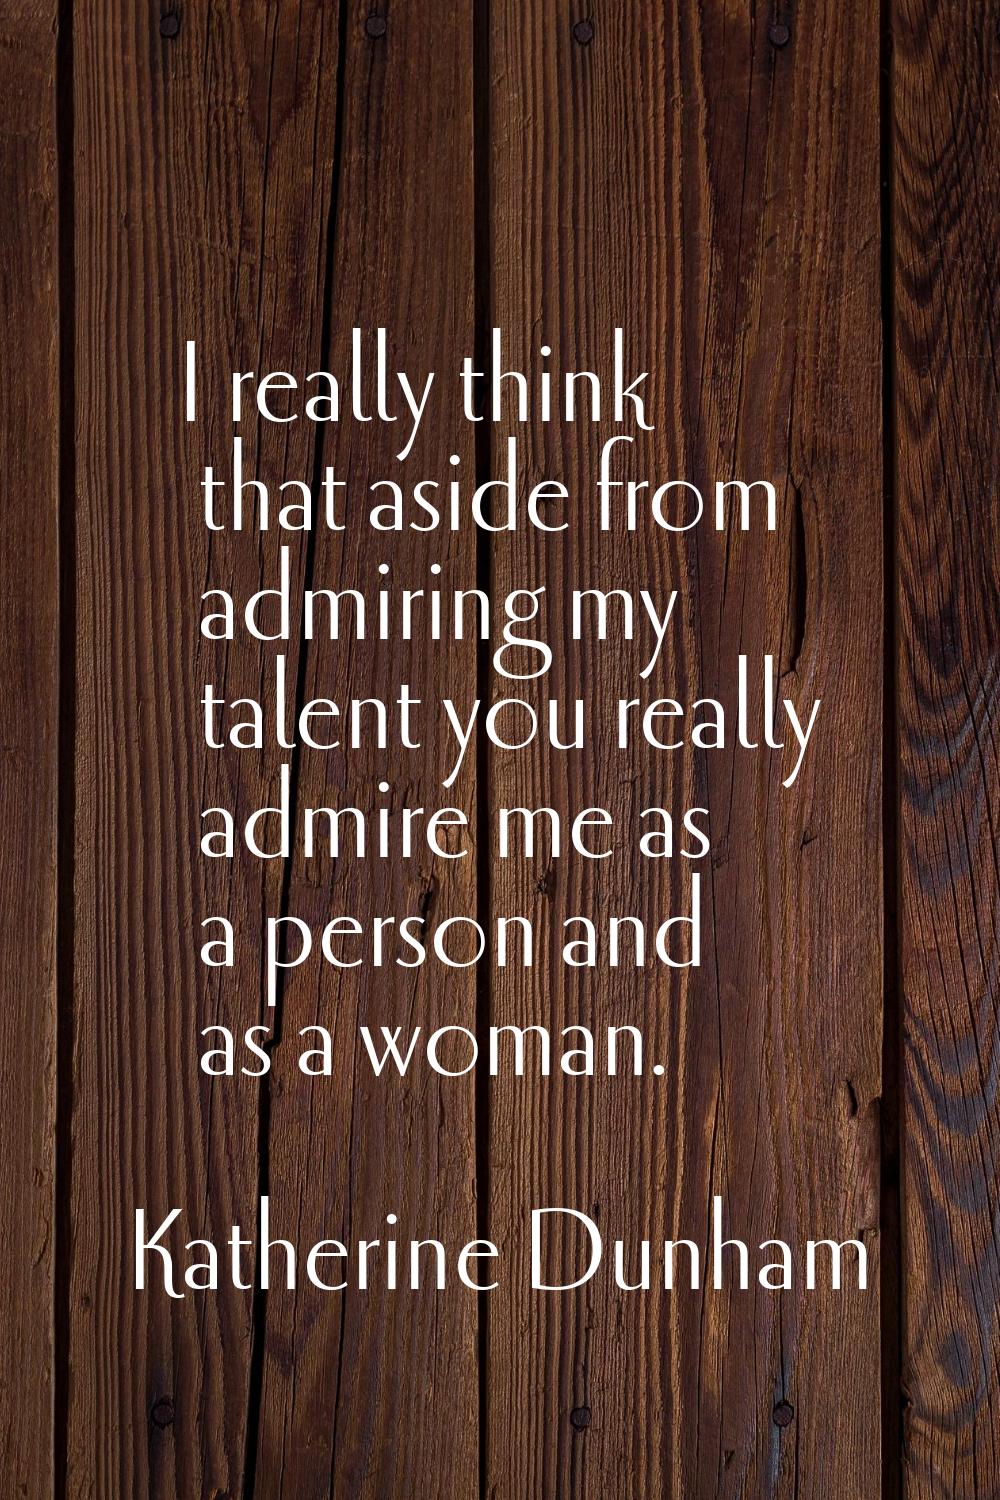 I really think that aside from admiring my talent you really admire me as a person and as a woman.